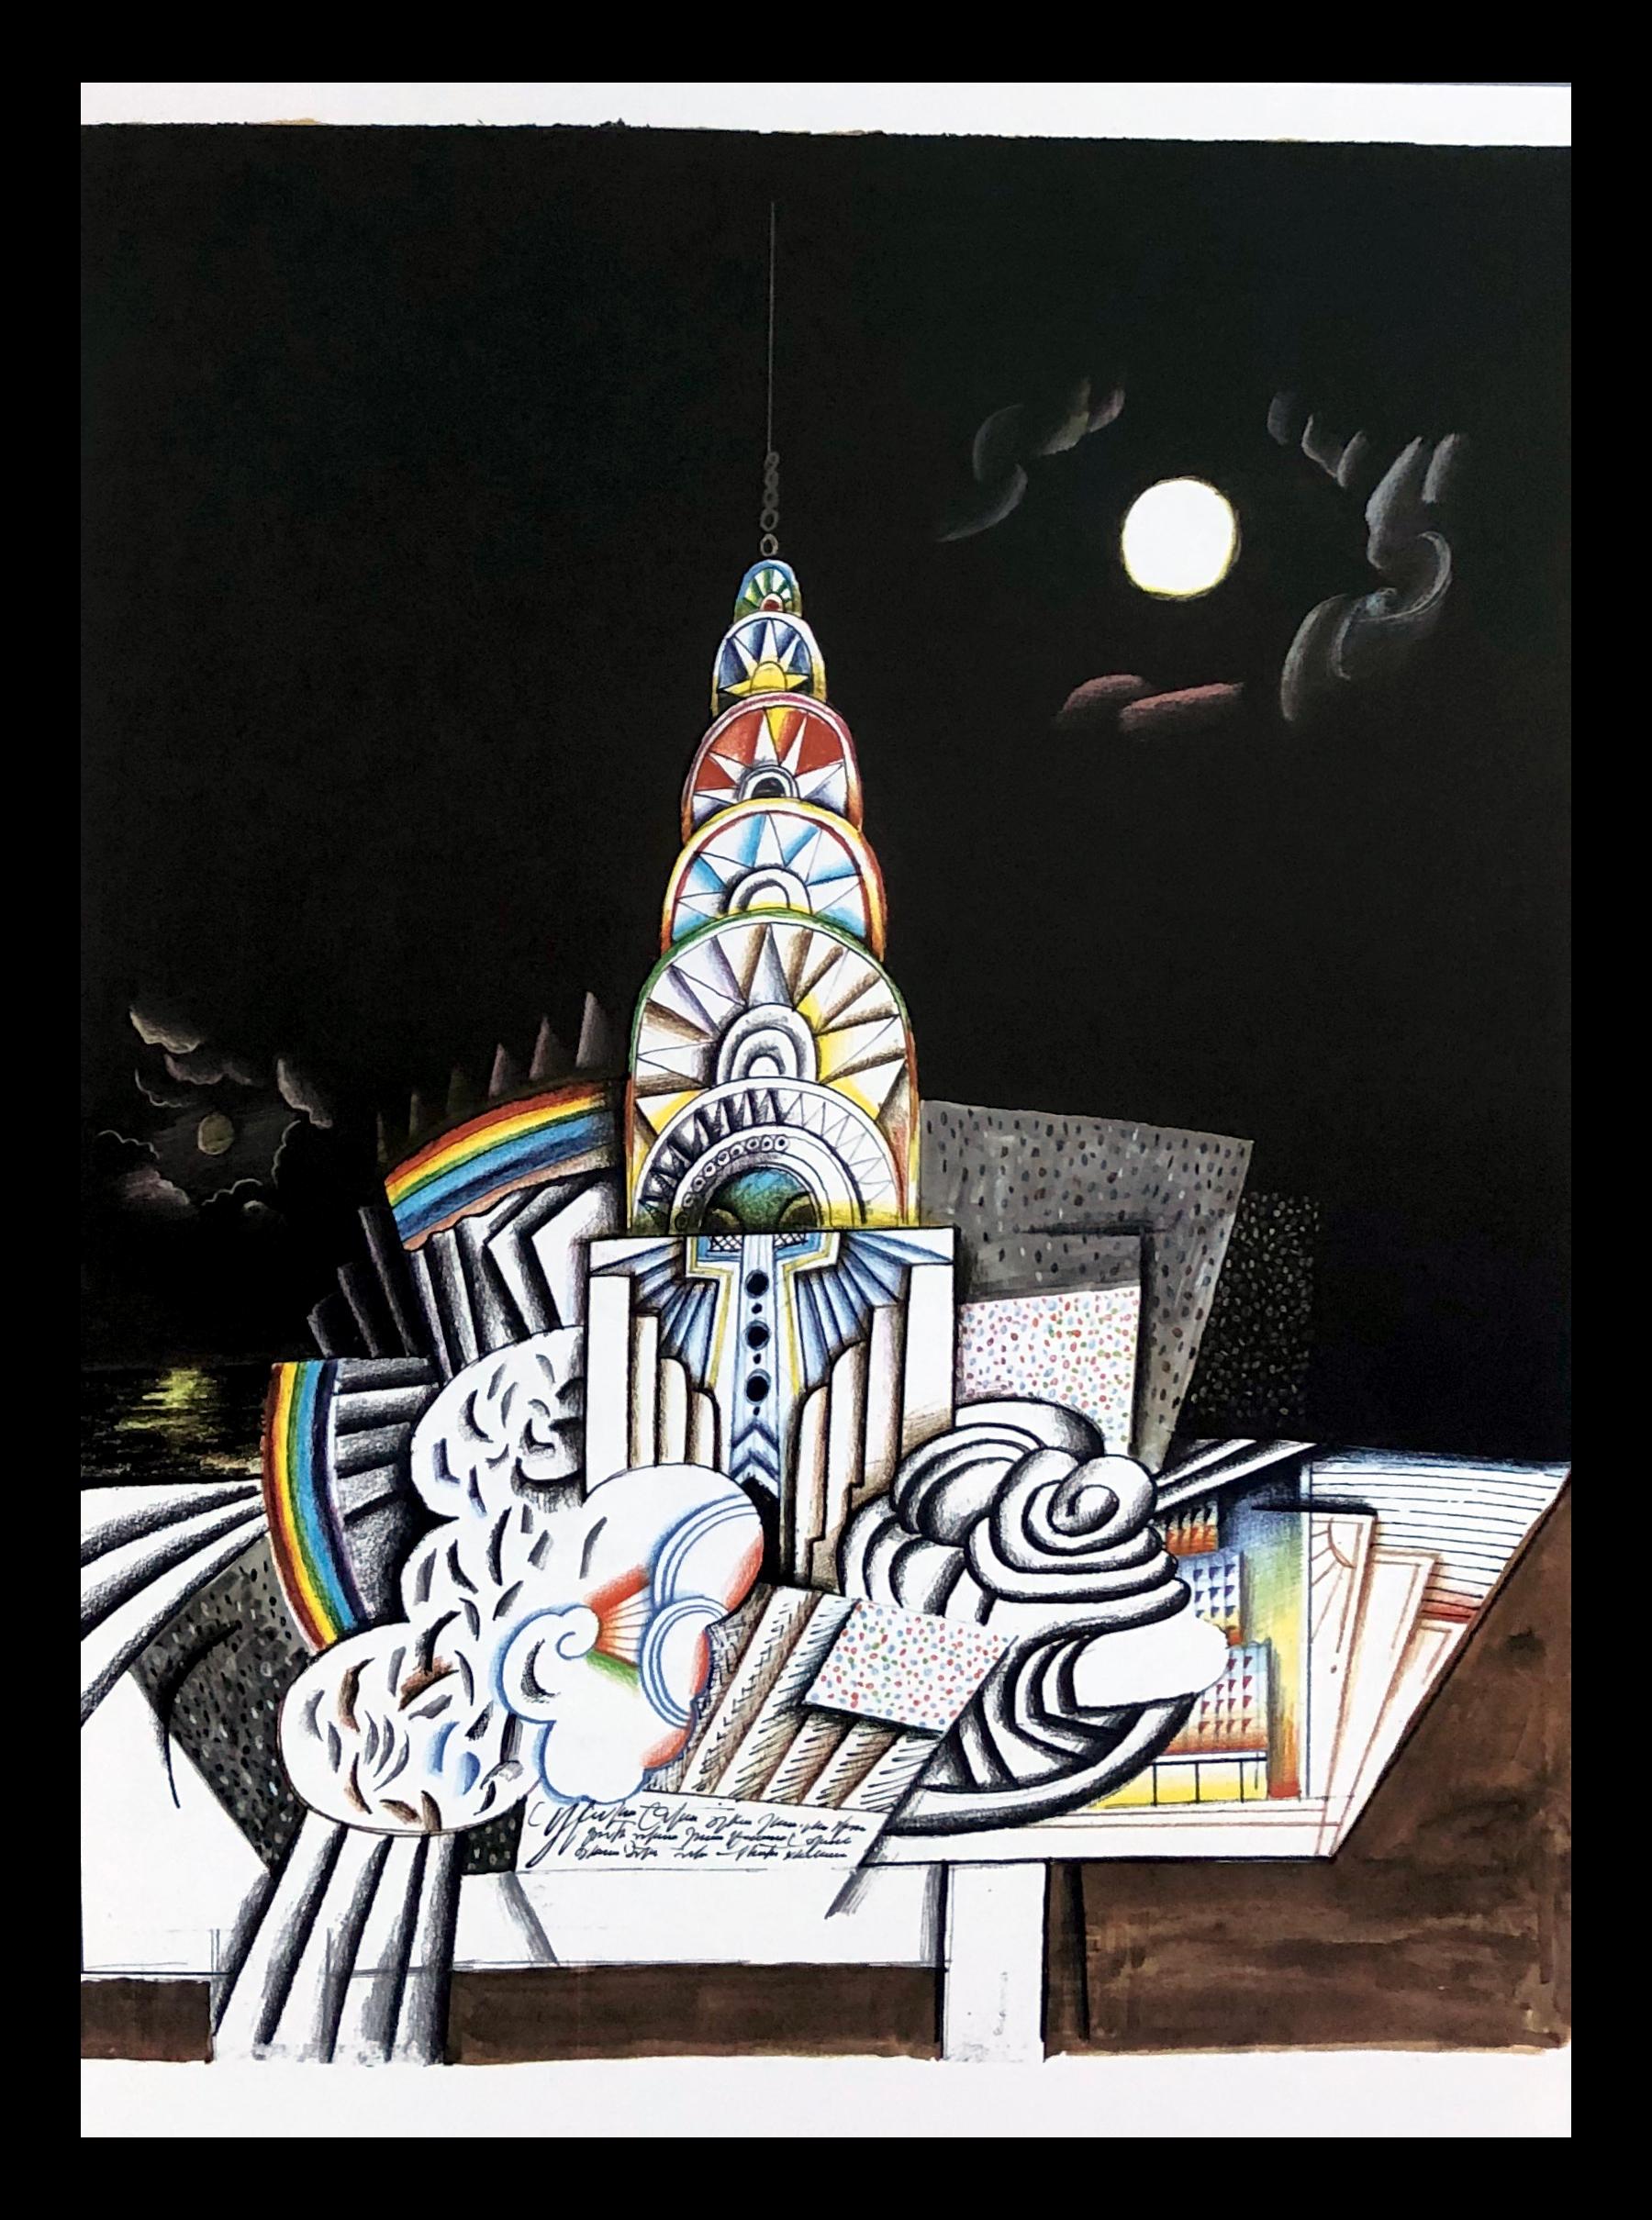 Saul Steinberg (untitled) Chrysler Building Lithograph 
Published by: Galerie Maeght, Paris, c.1970
Portfolio: Derrière le miroir

Lithograph in colors c.1970
11 x 14 inches
Very good overall vintage condition 
Unsigned from an edition of unknown